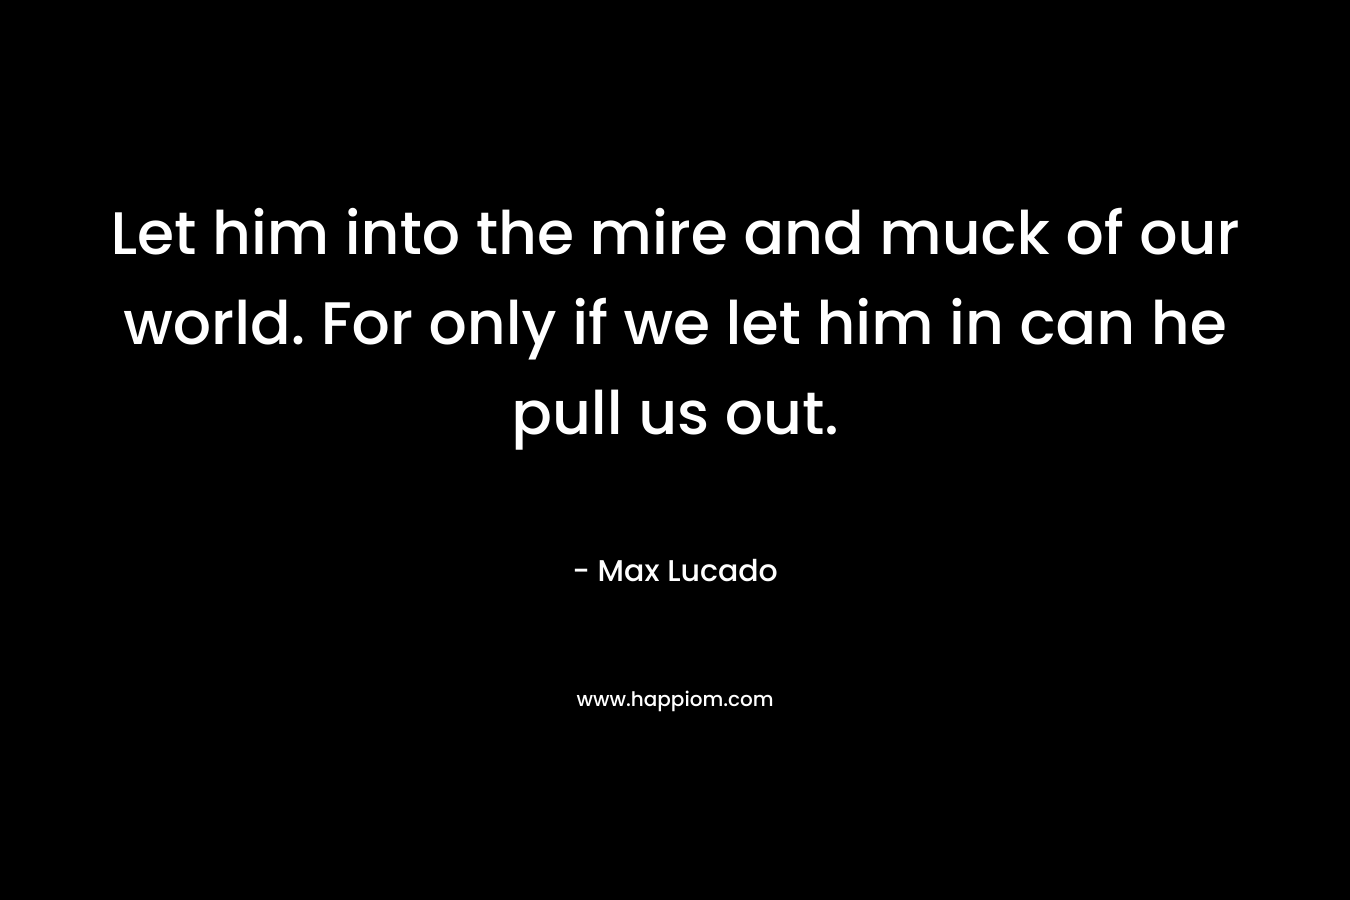 Let him into the mire and muck of our world. For only if we let him in can he pull us out. – Max Lucado